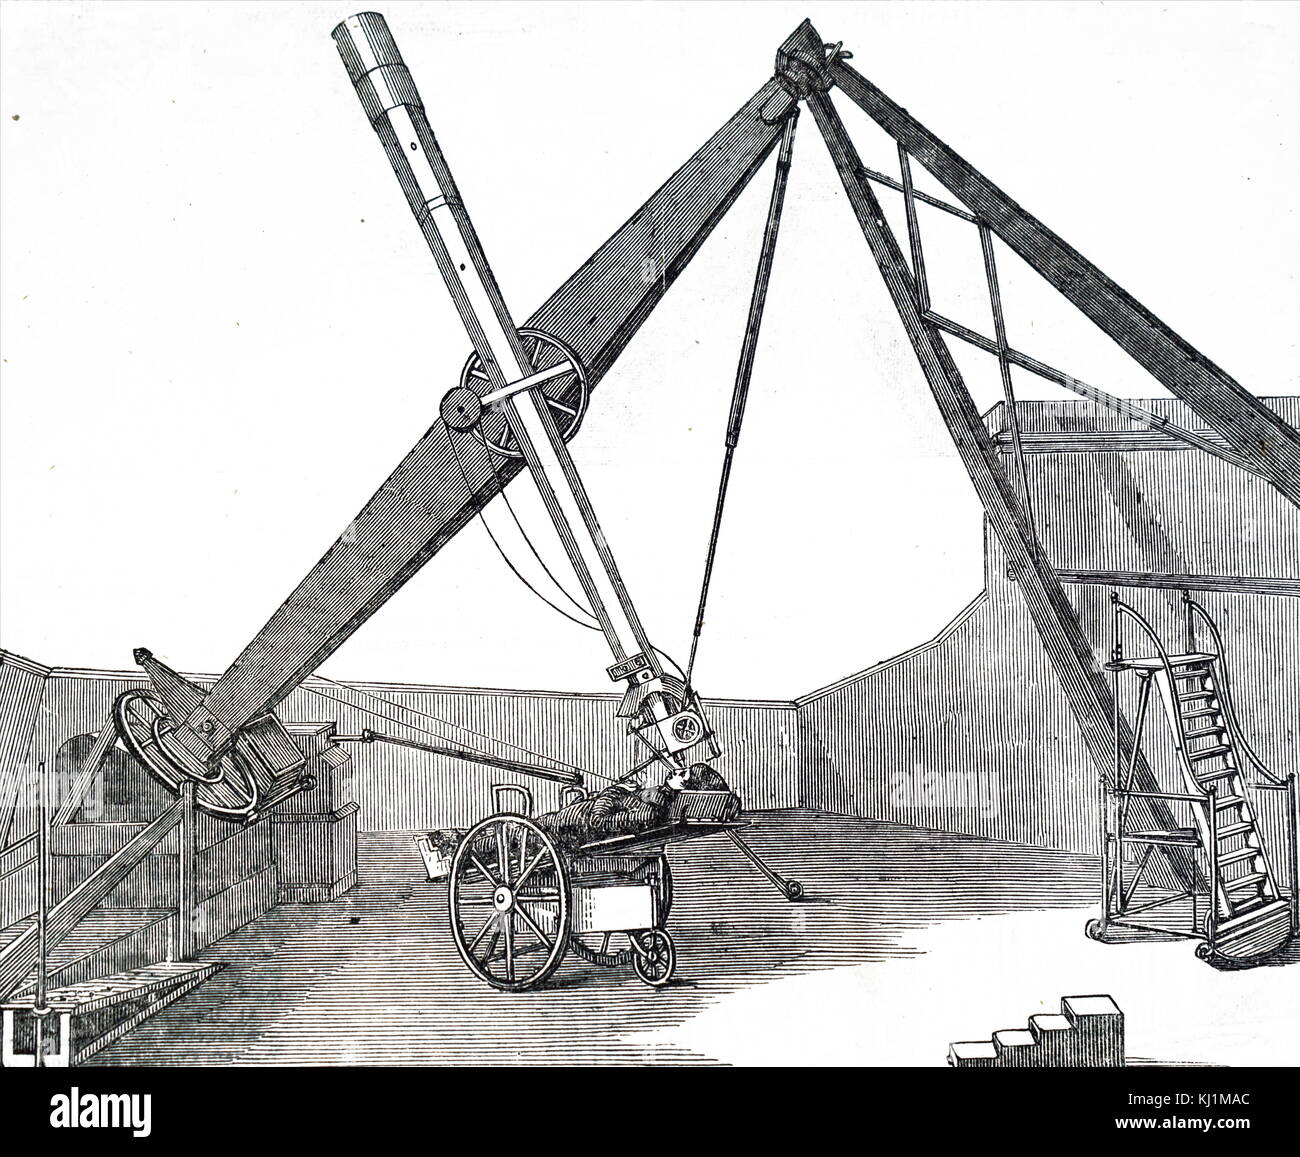 Engraving depicting a refractor with a focal length of 120 inches being used by Henry Lawson. Henry Lawson (1774-1855) an English astronomer. Dated 19th Century Stock Photo